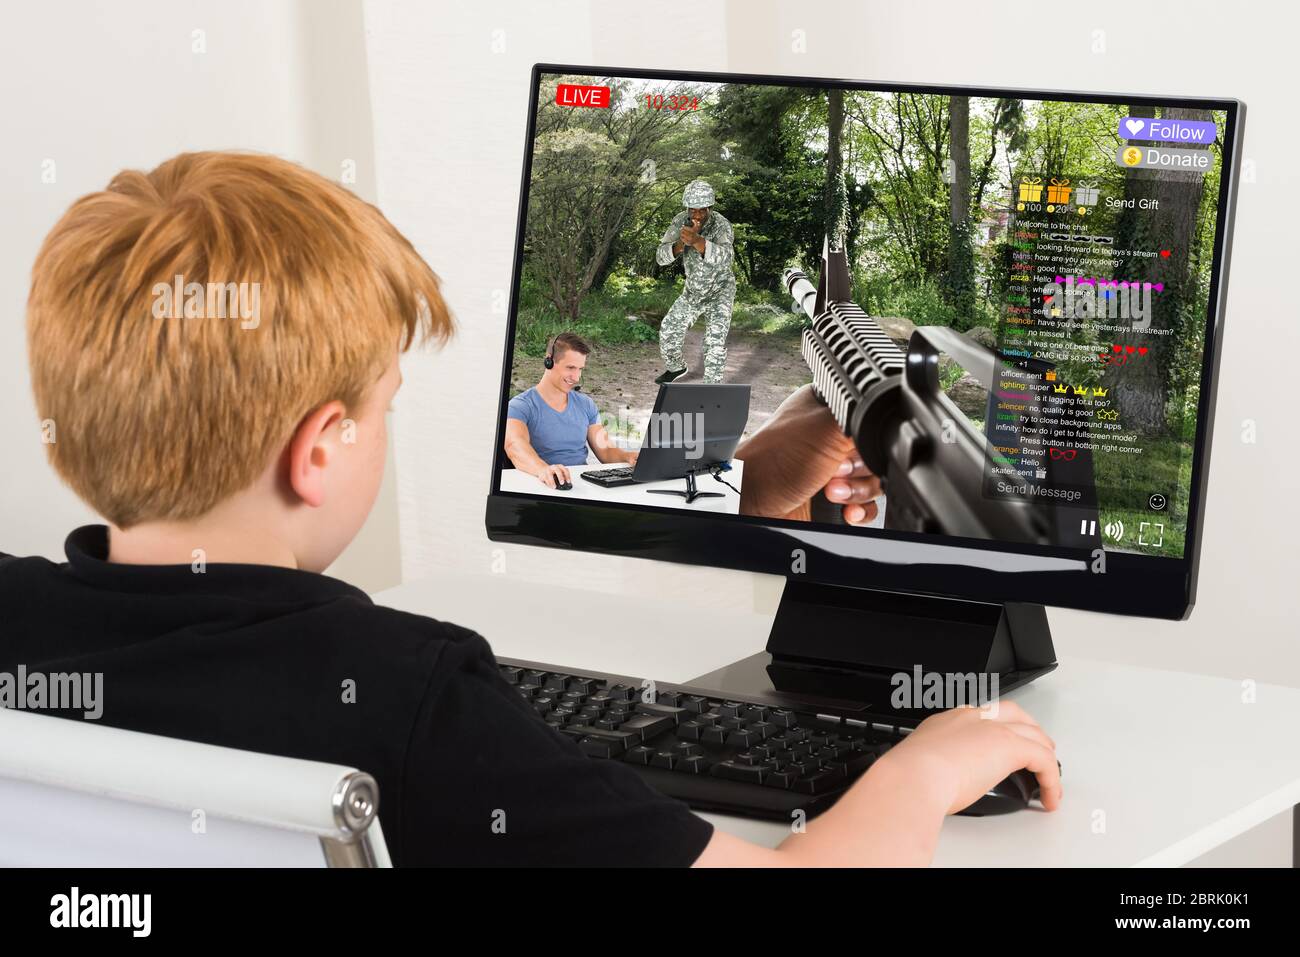 Kid Watching Live Game Streaming Session On Desktop Computer Stock Photo